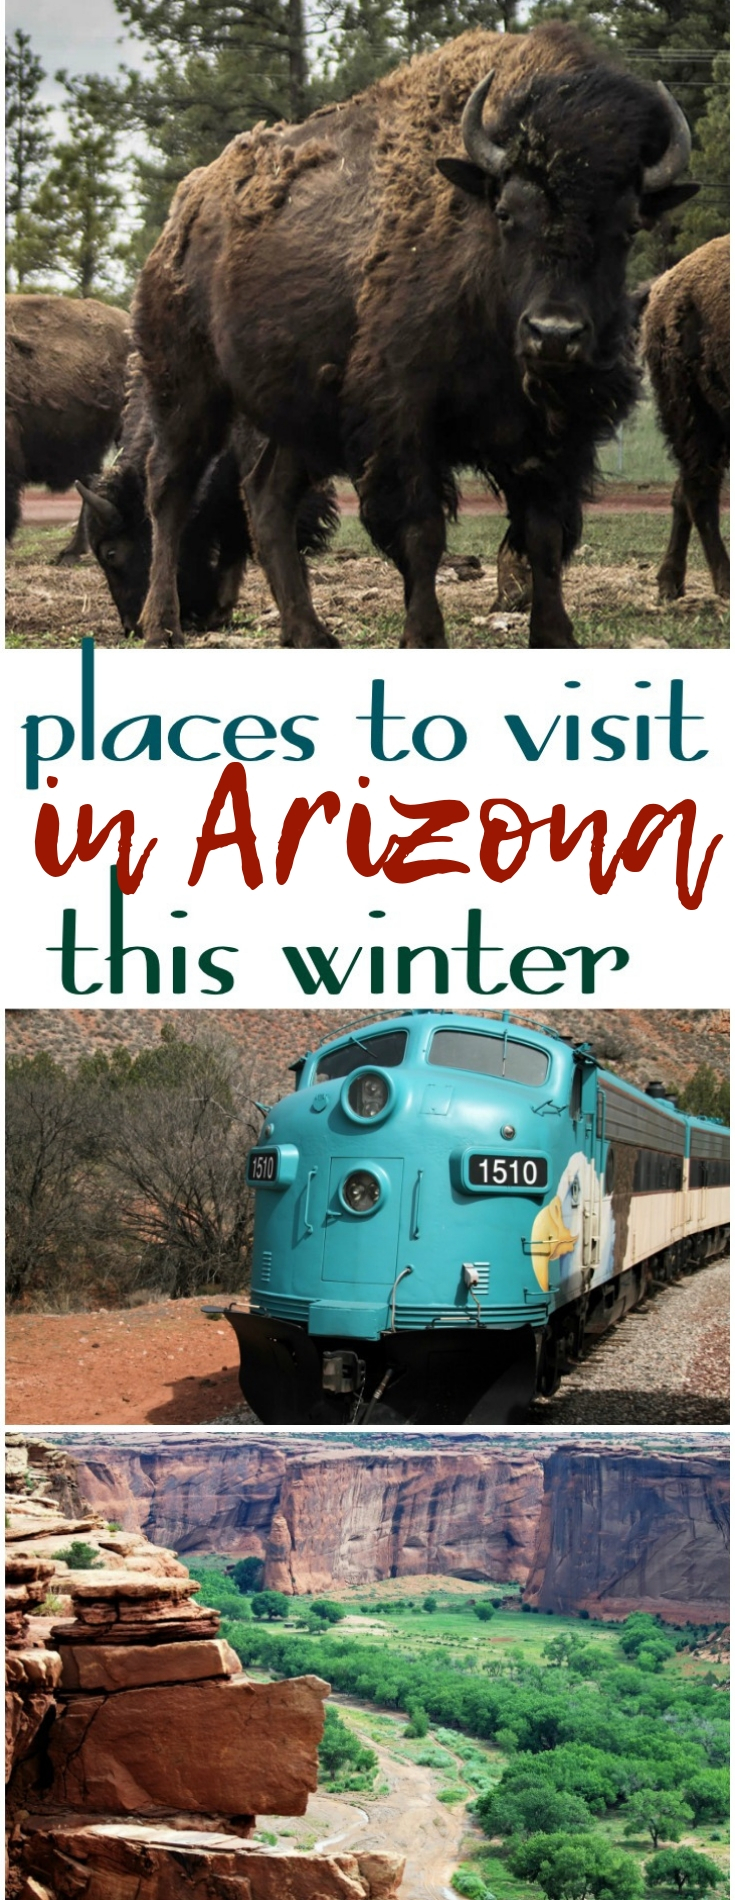 With cooler weather comes the opportunity to be outside! Here are over 11 places you will want to visit in Arizona this winter!